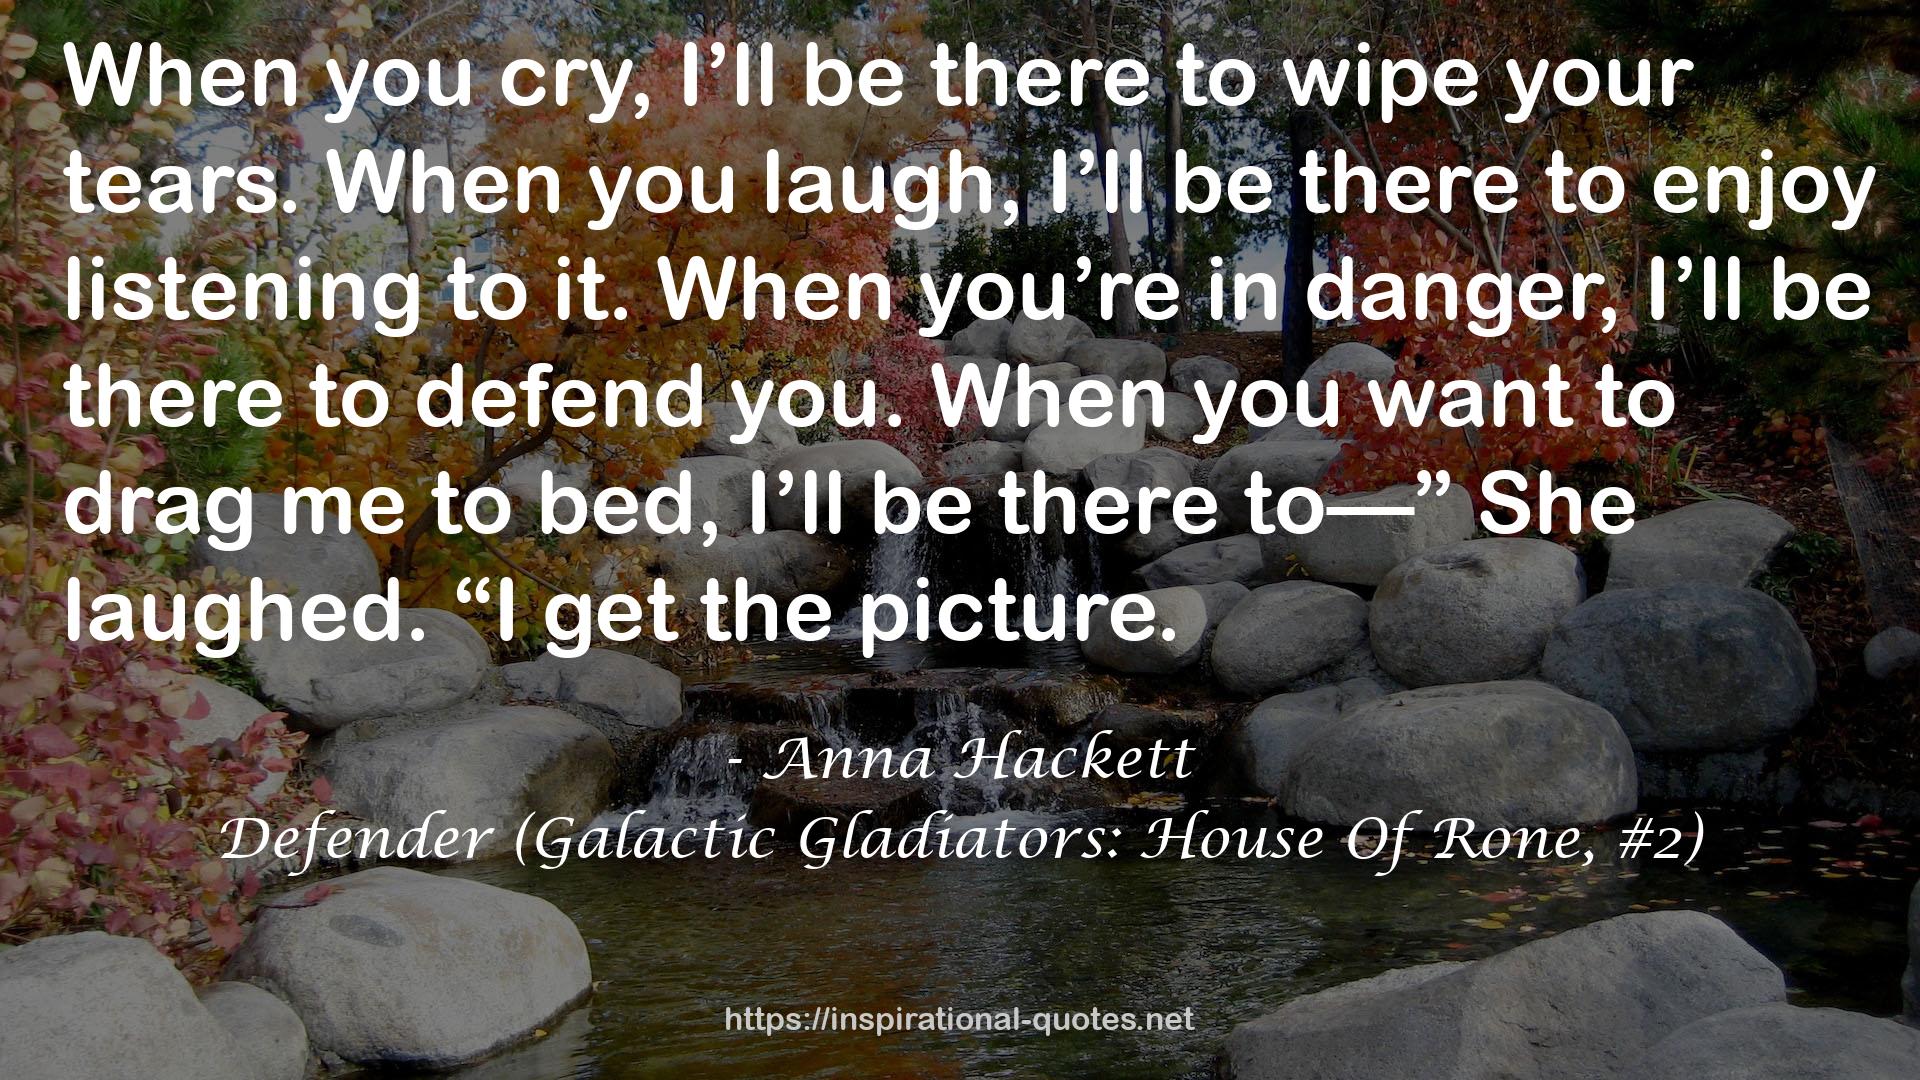 Defender (Galactic Gladiators: House Of Rone, #2) QUOTES